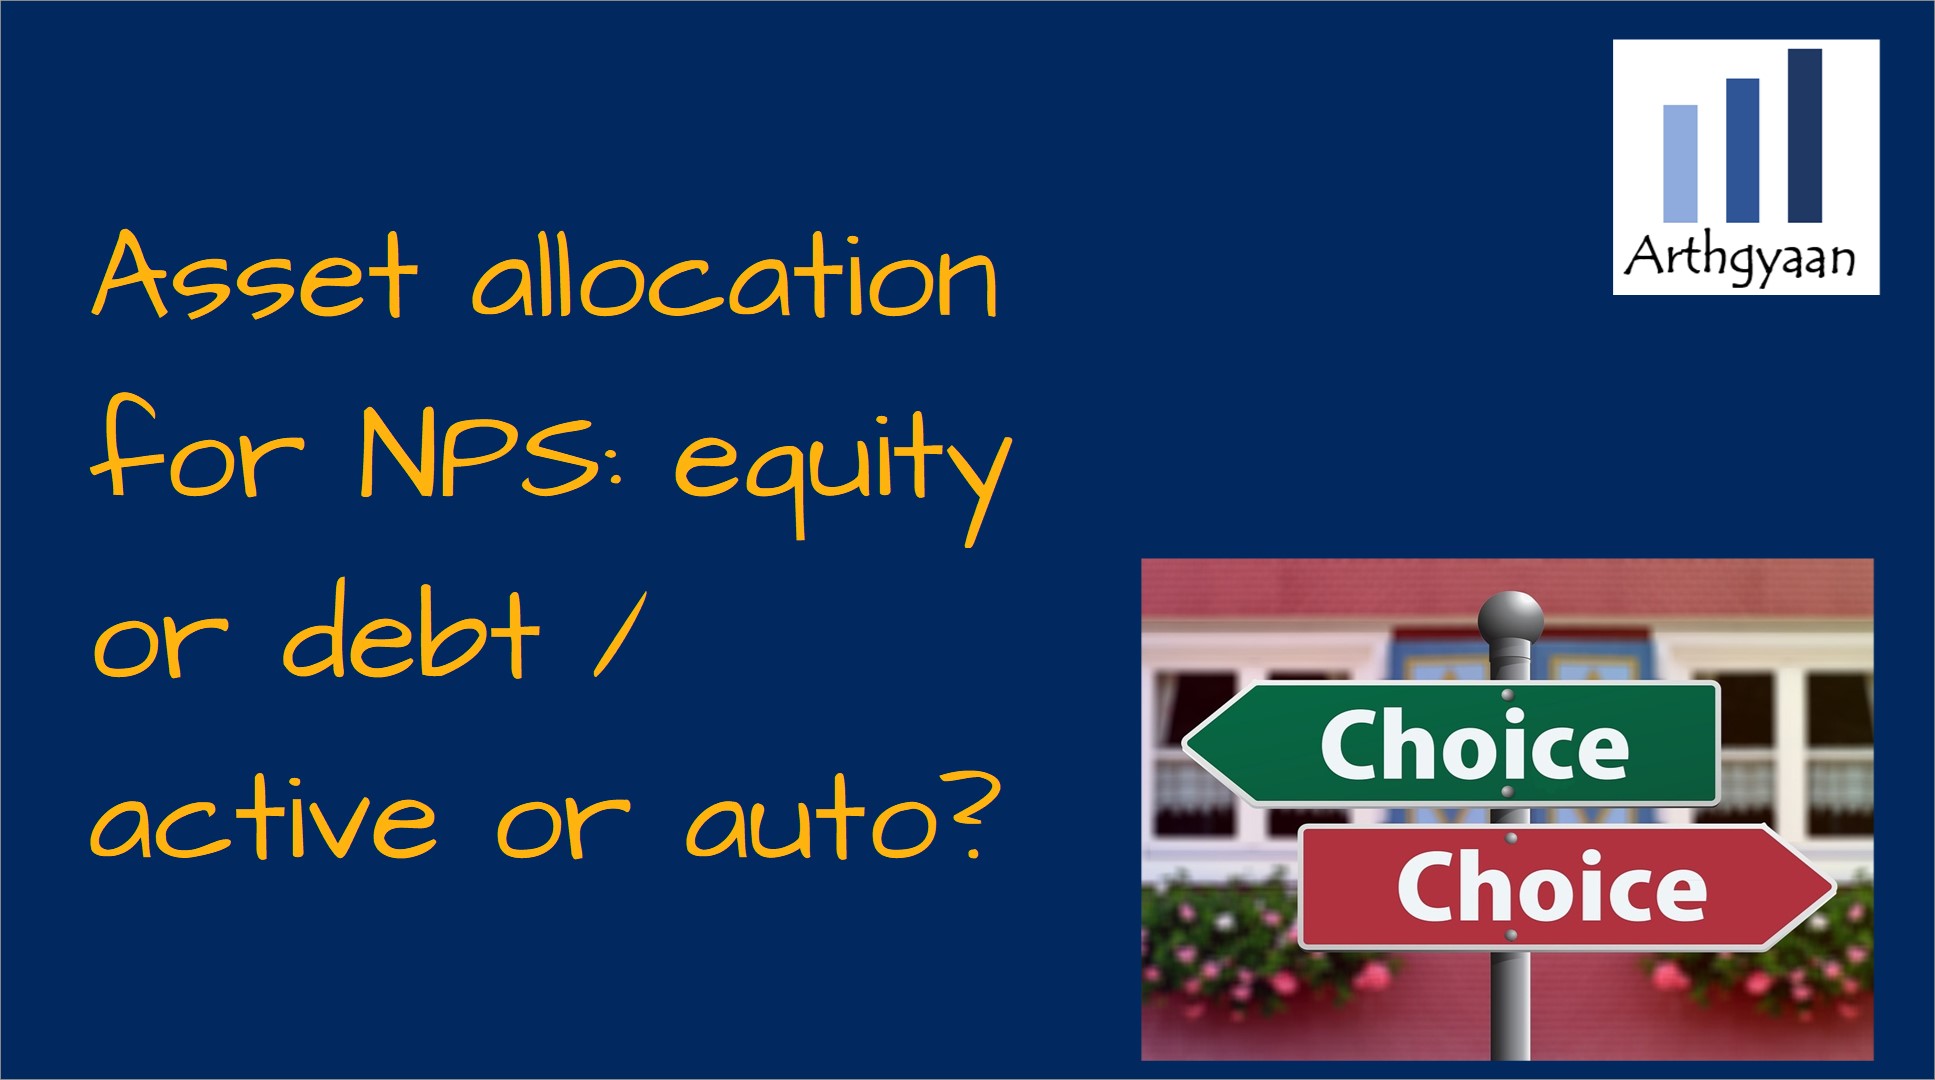 Asset allocation for NPS: equity or debt / active or auto?